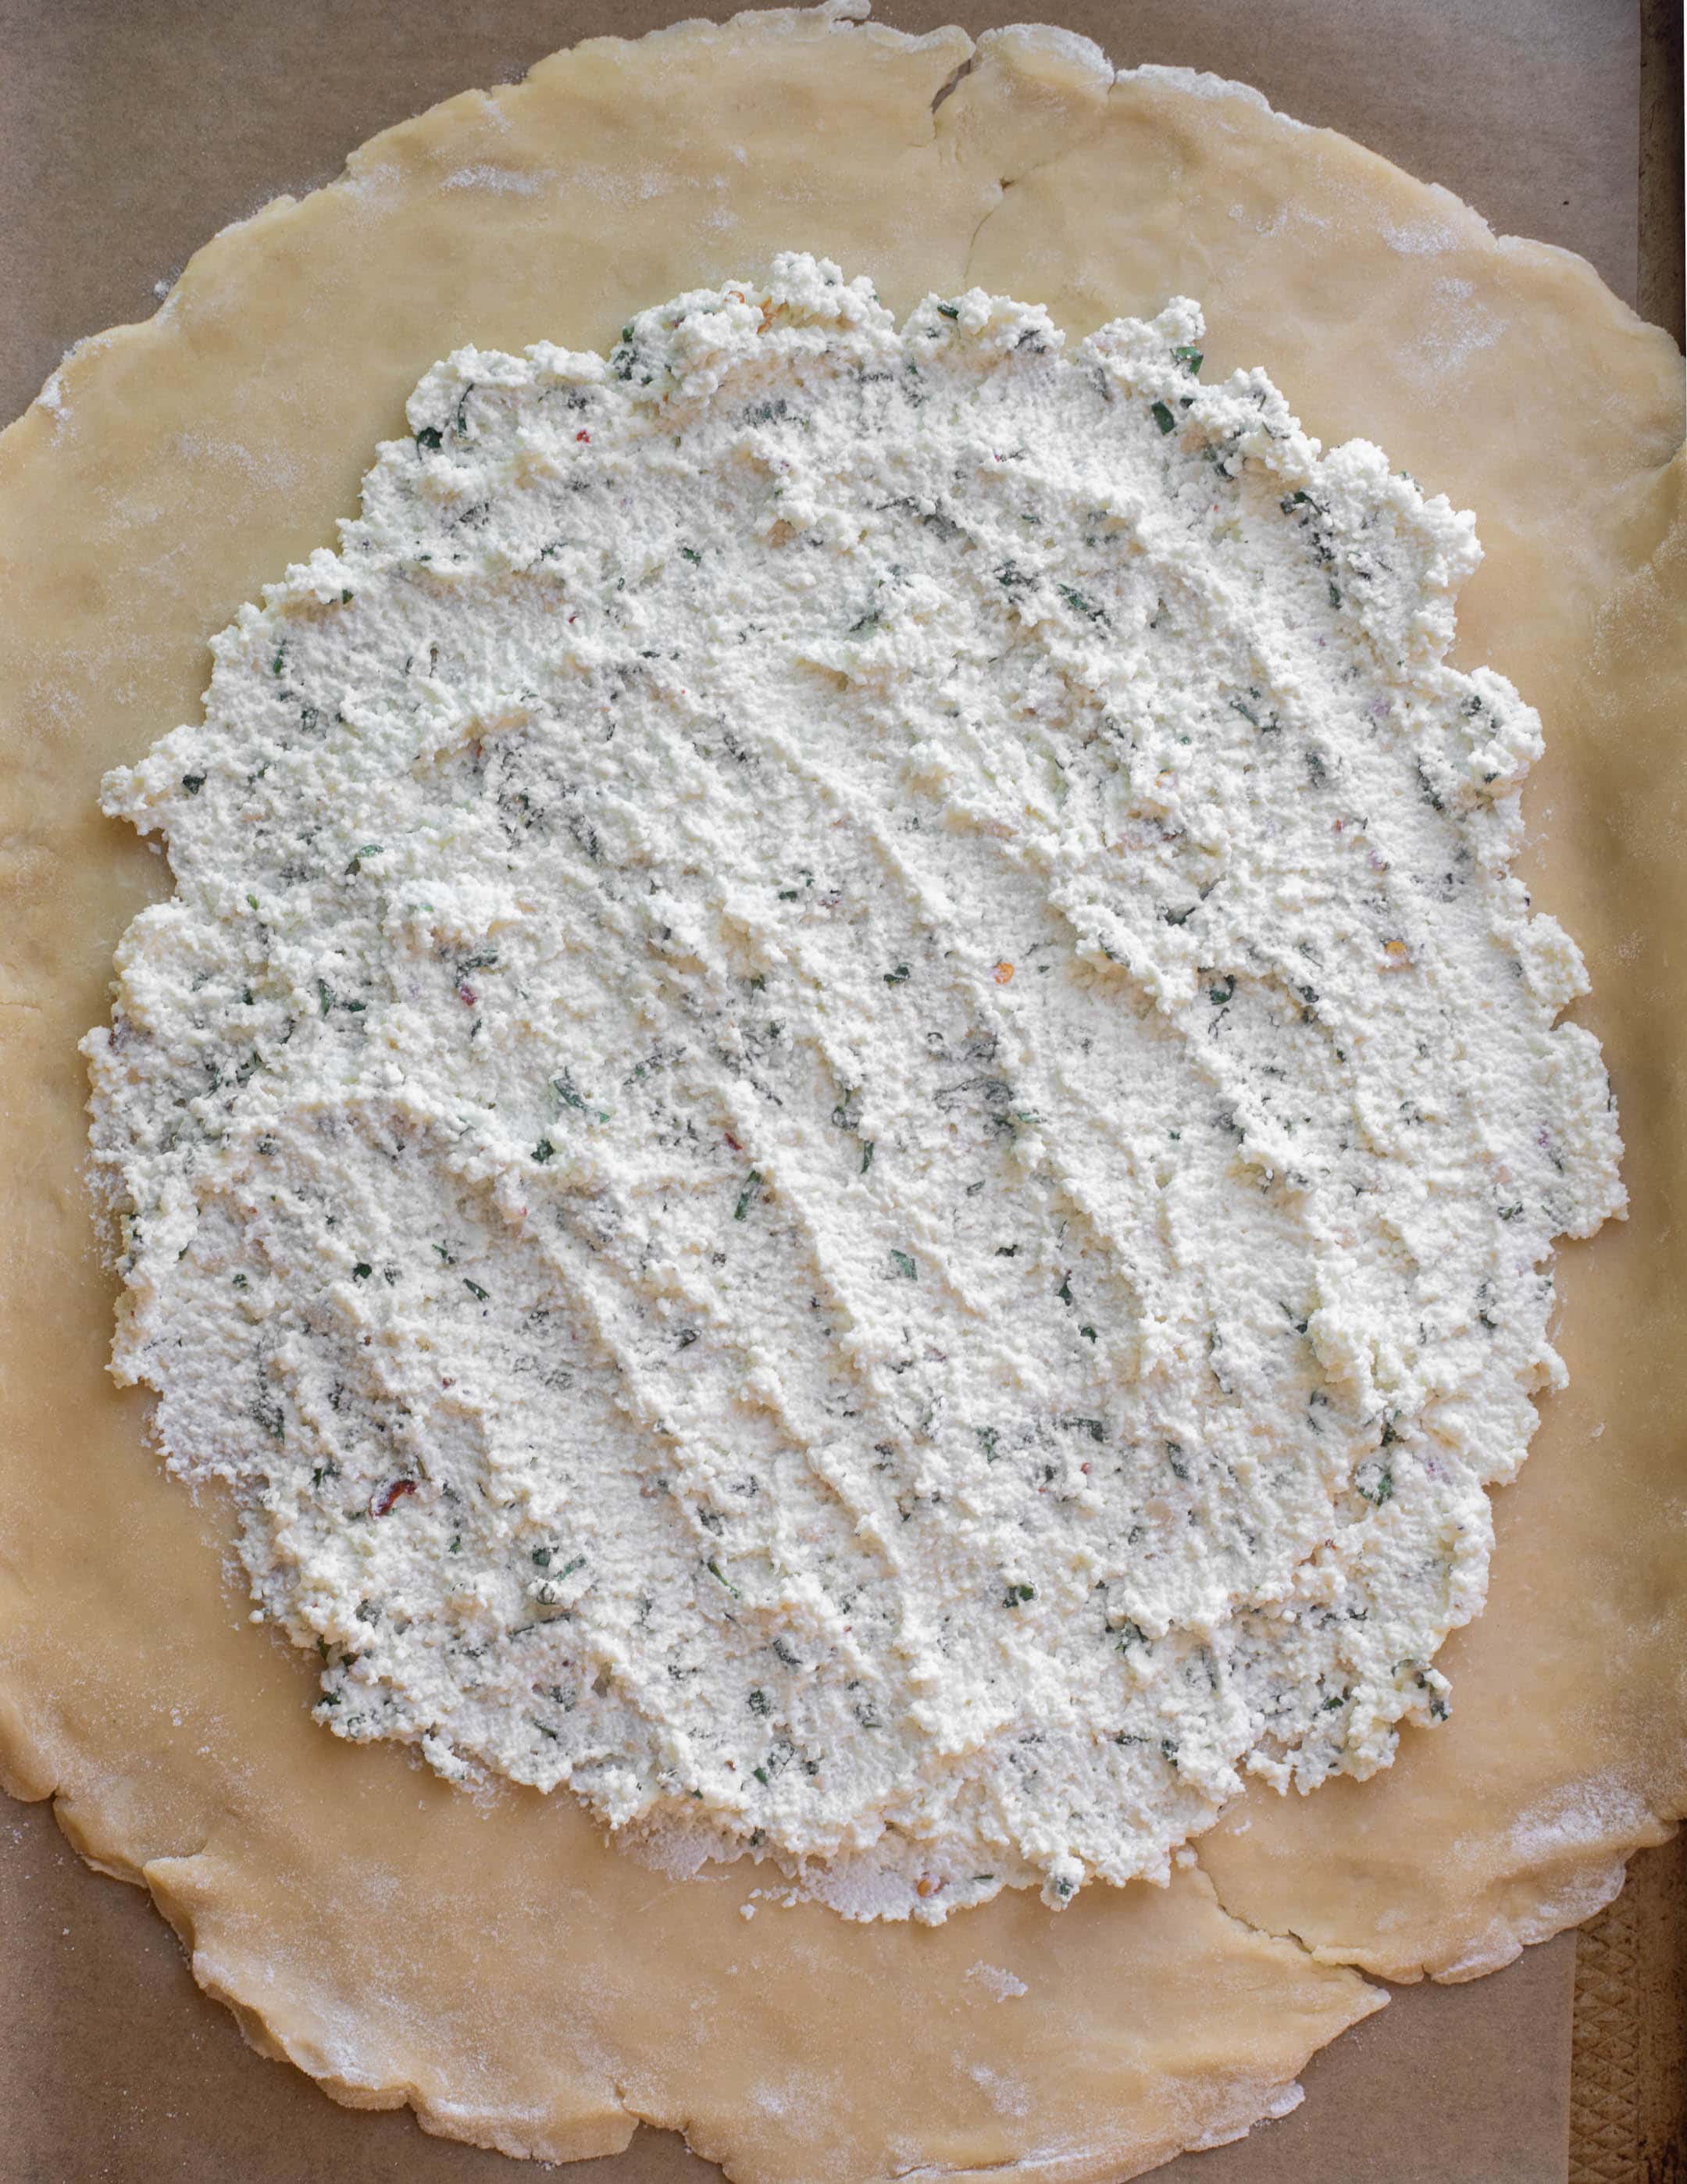 pie crust spread with ricotta cheese